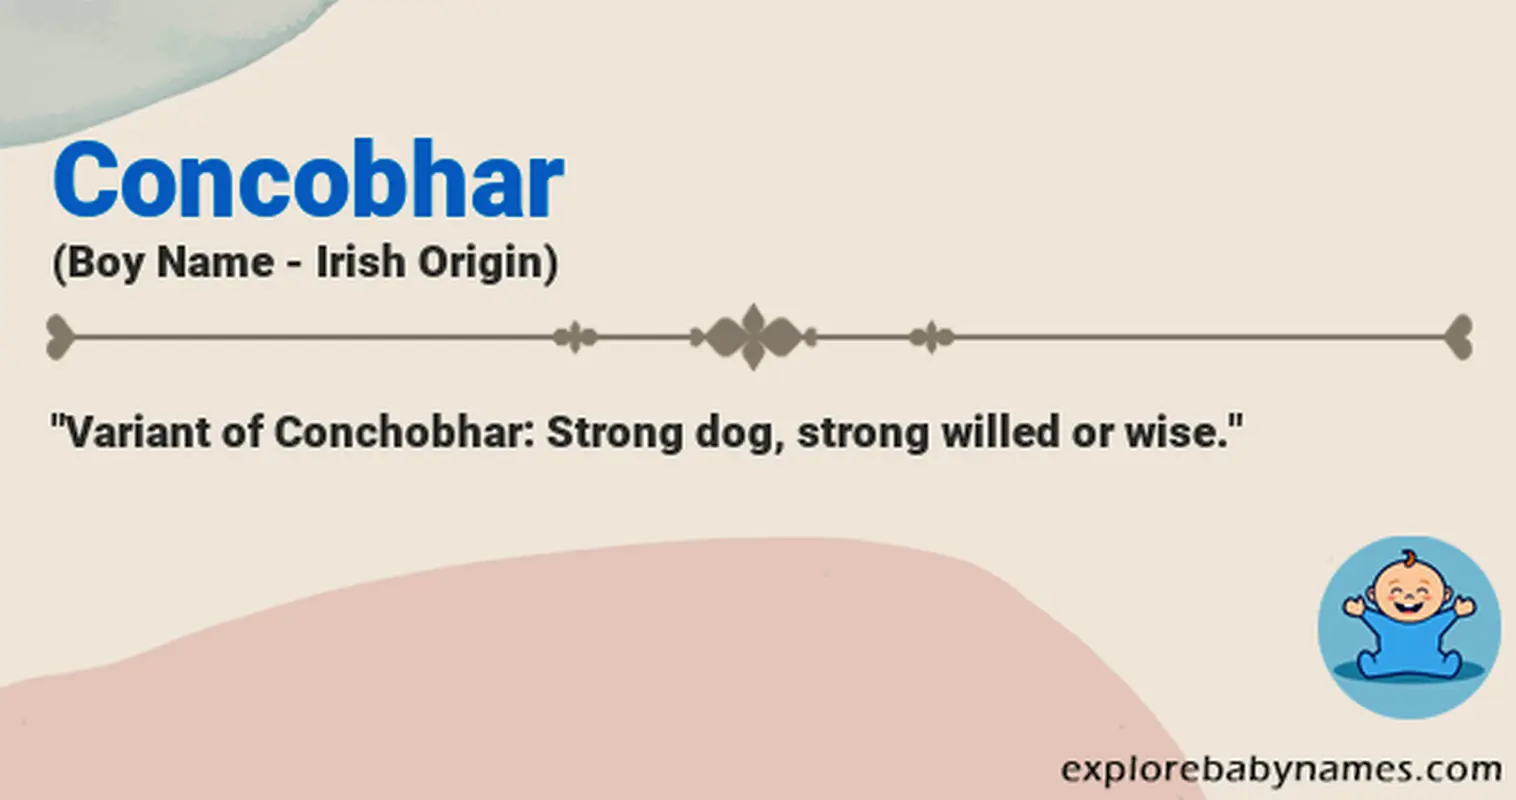 Meaning of Concobhar